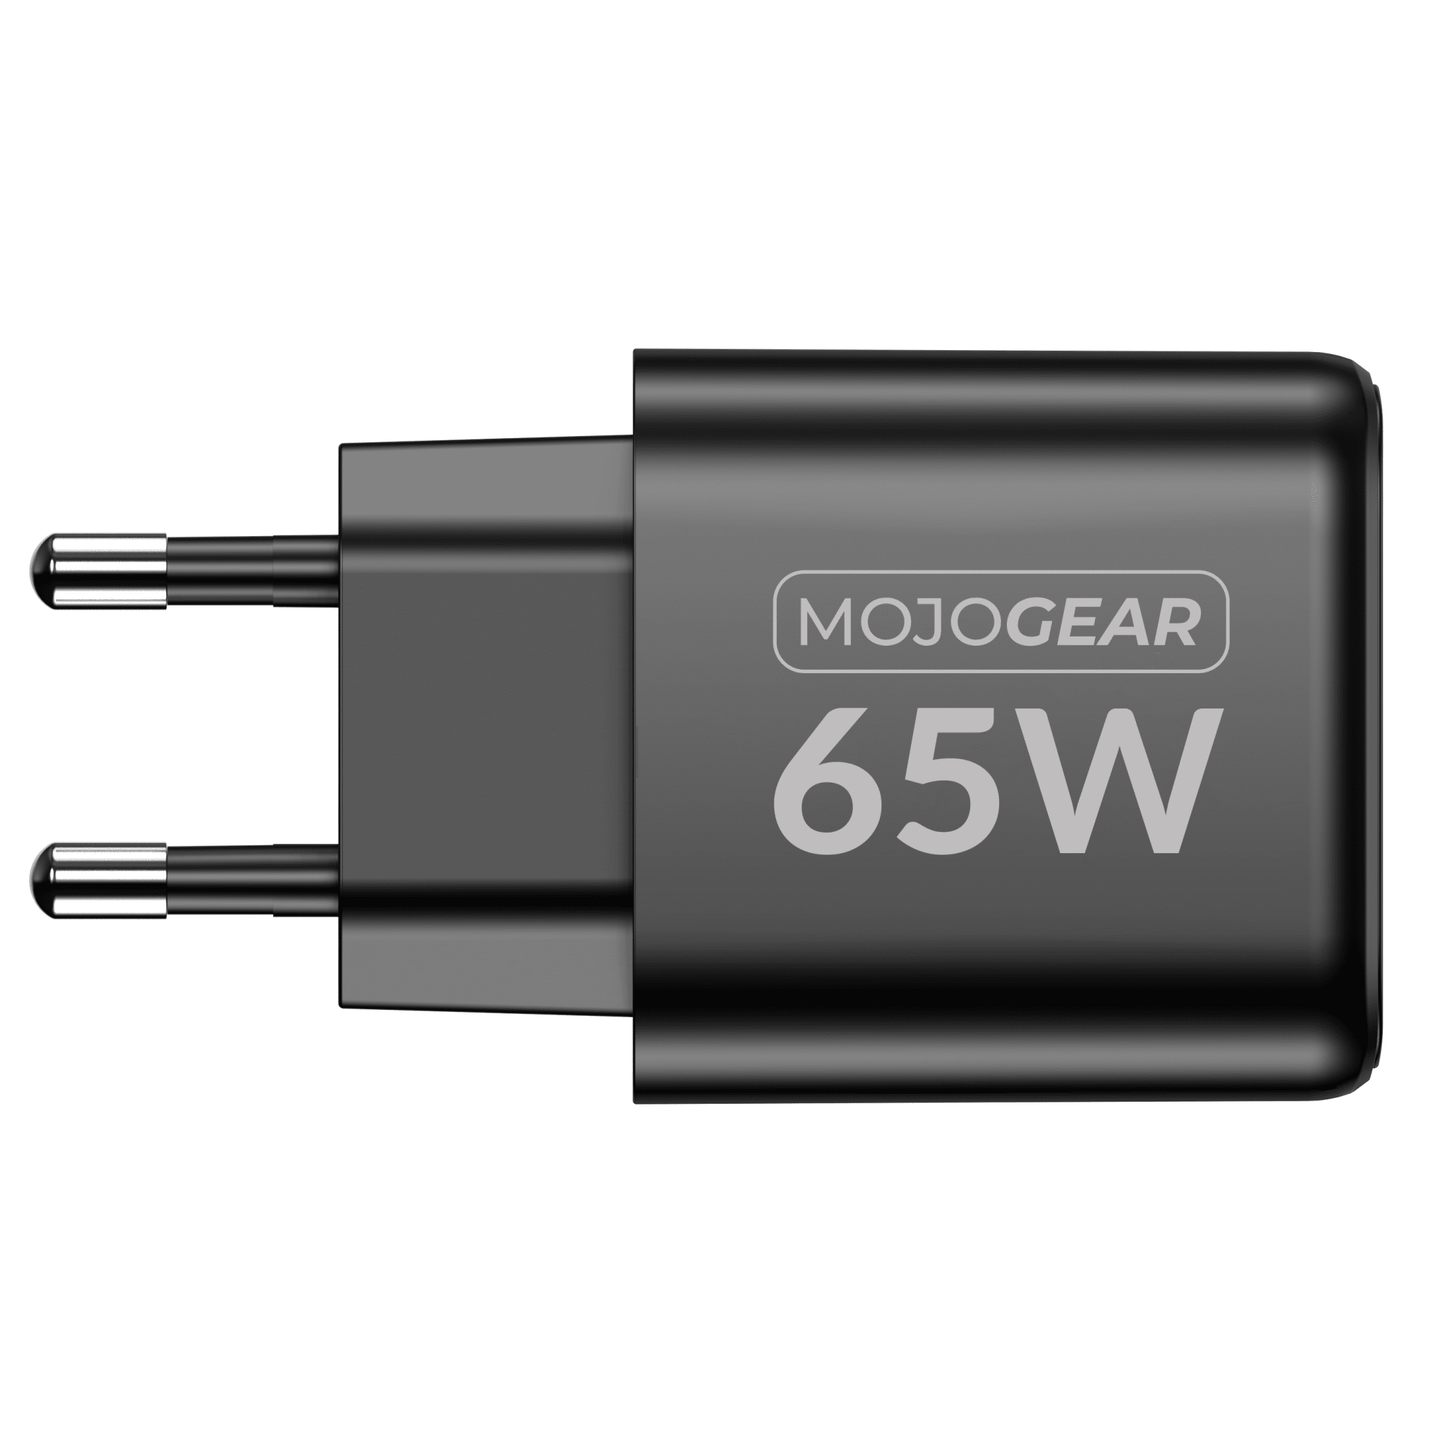 MOJOGEAR CHARGE+ 65W oplader met 3 poorten USB / USB-C